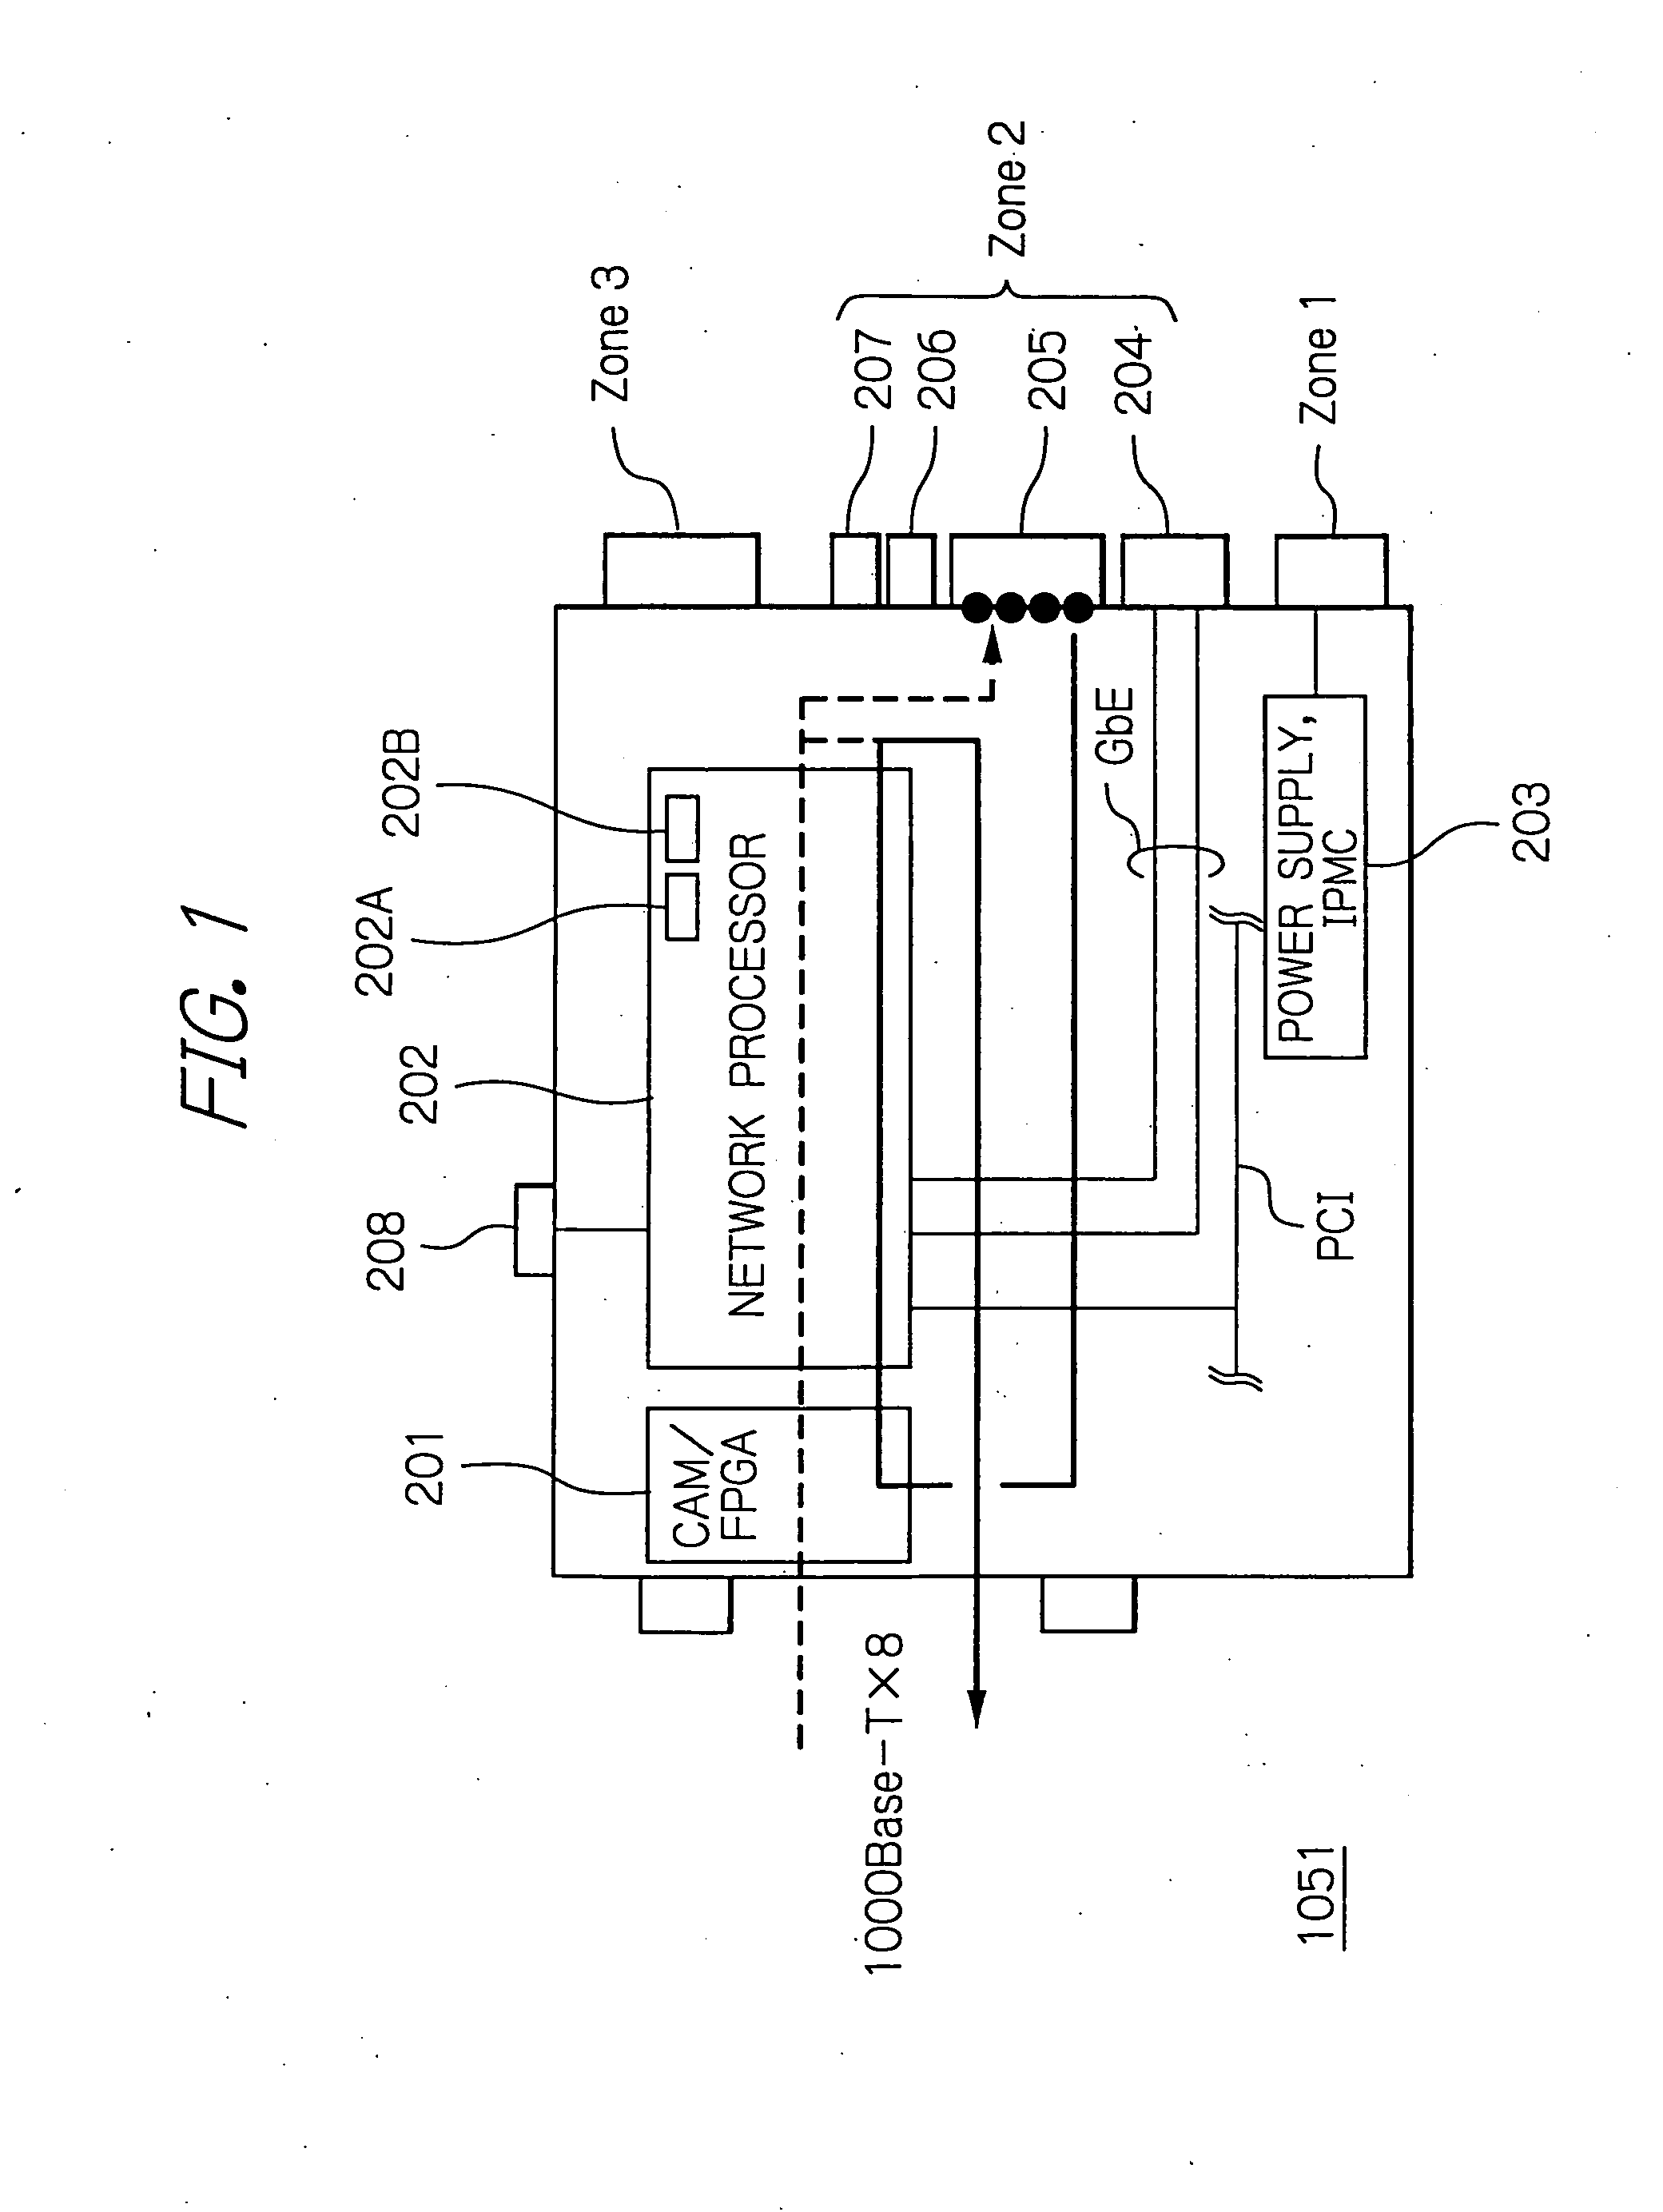 High security backplane-based interconnection system capable of processing a large amount of traffic in parallel